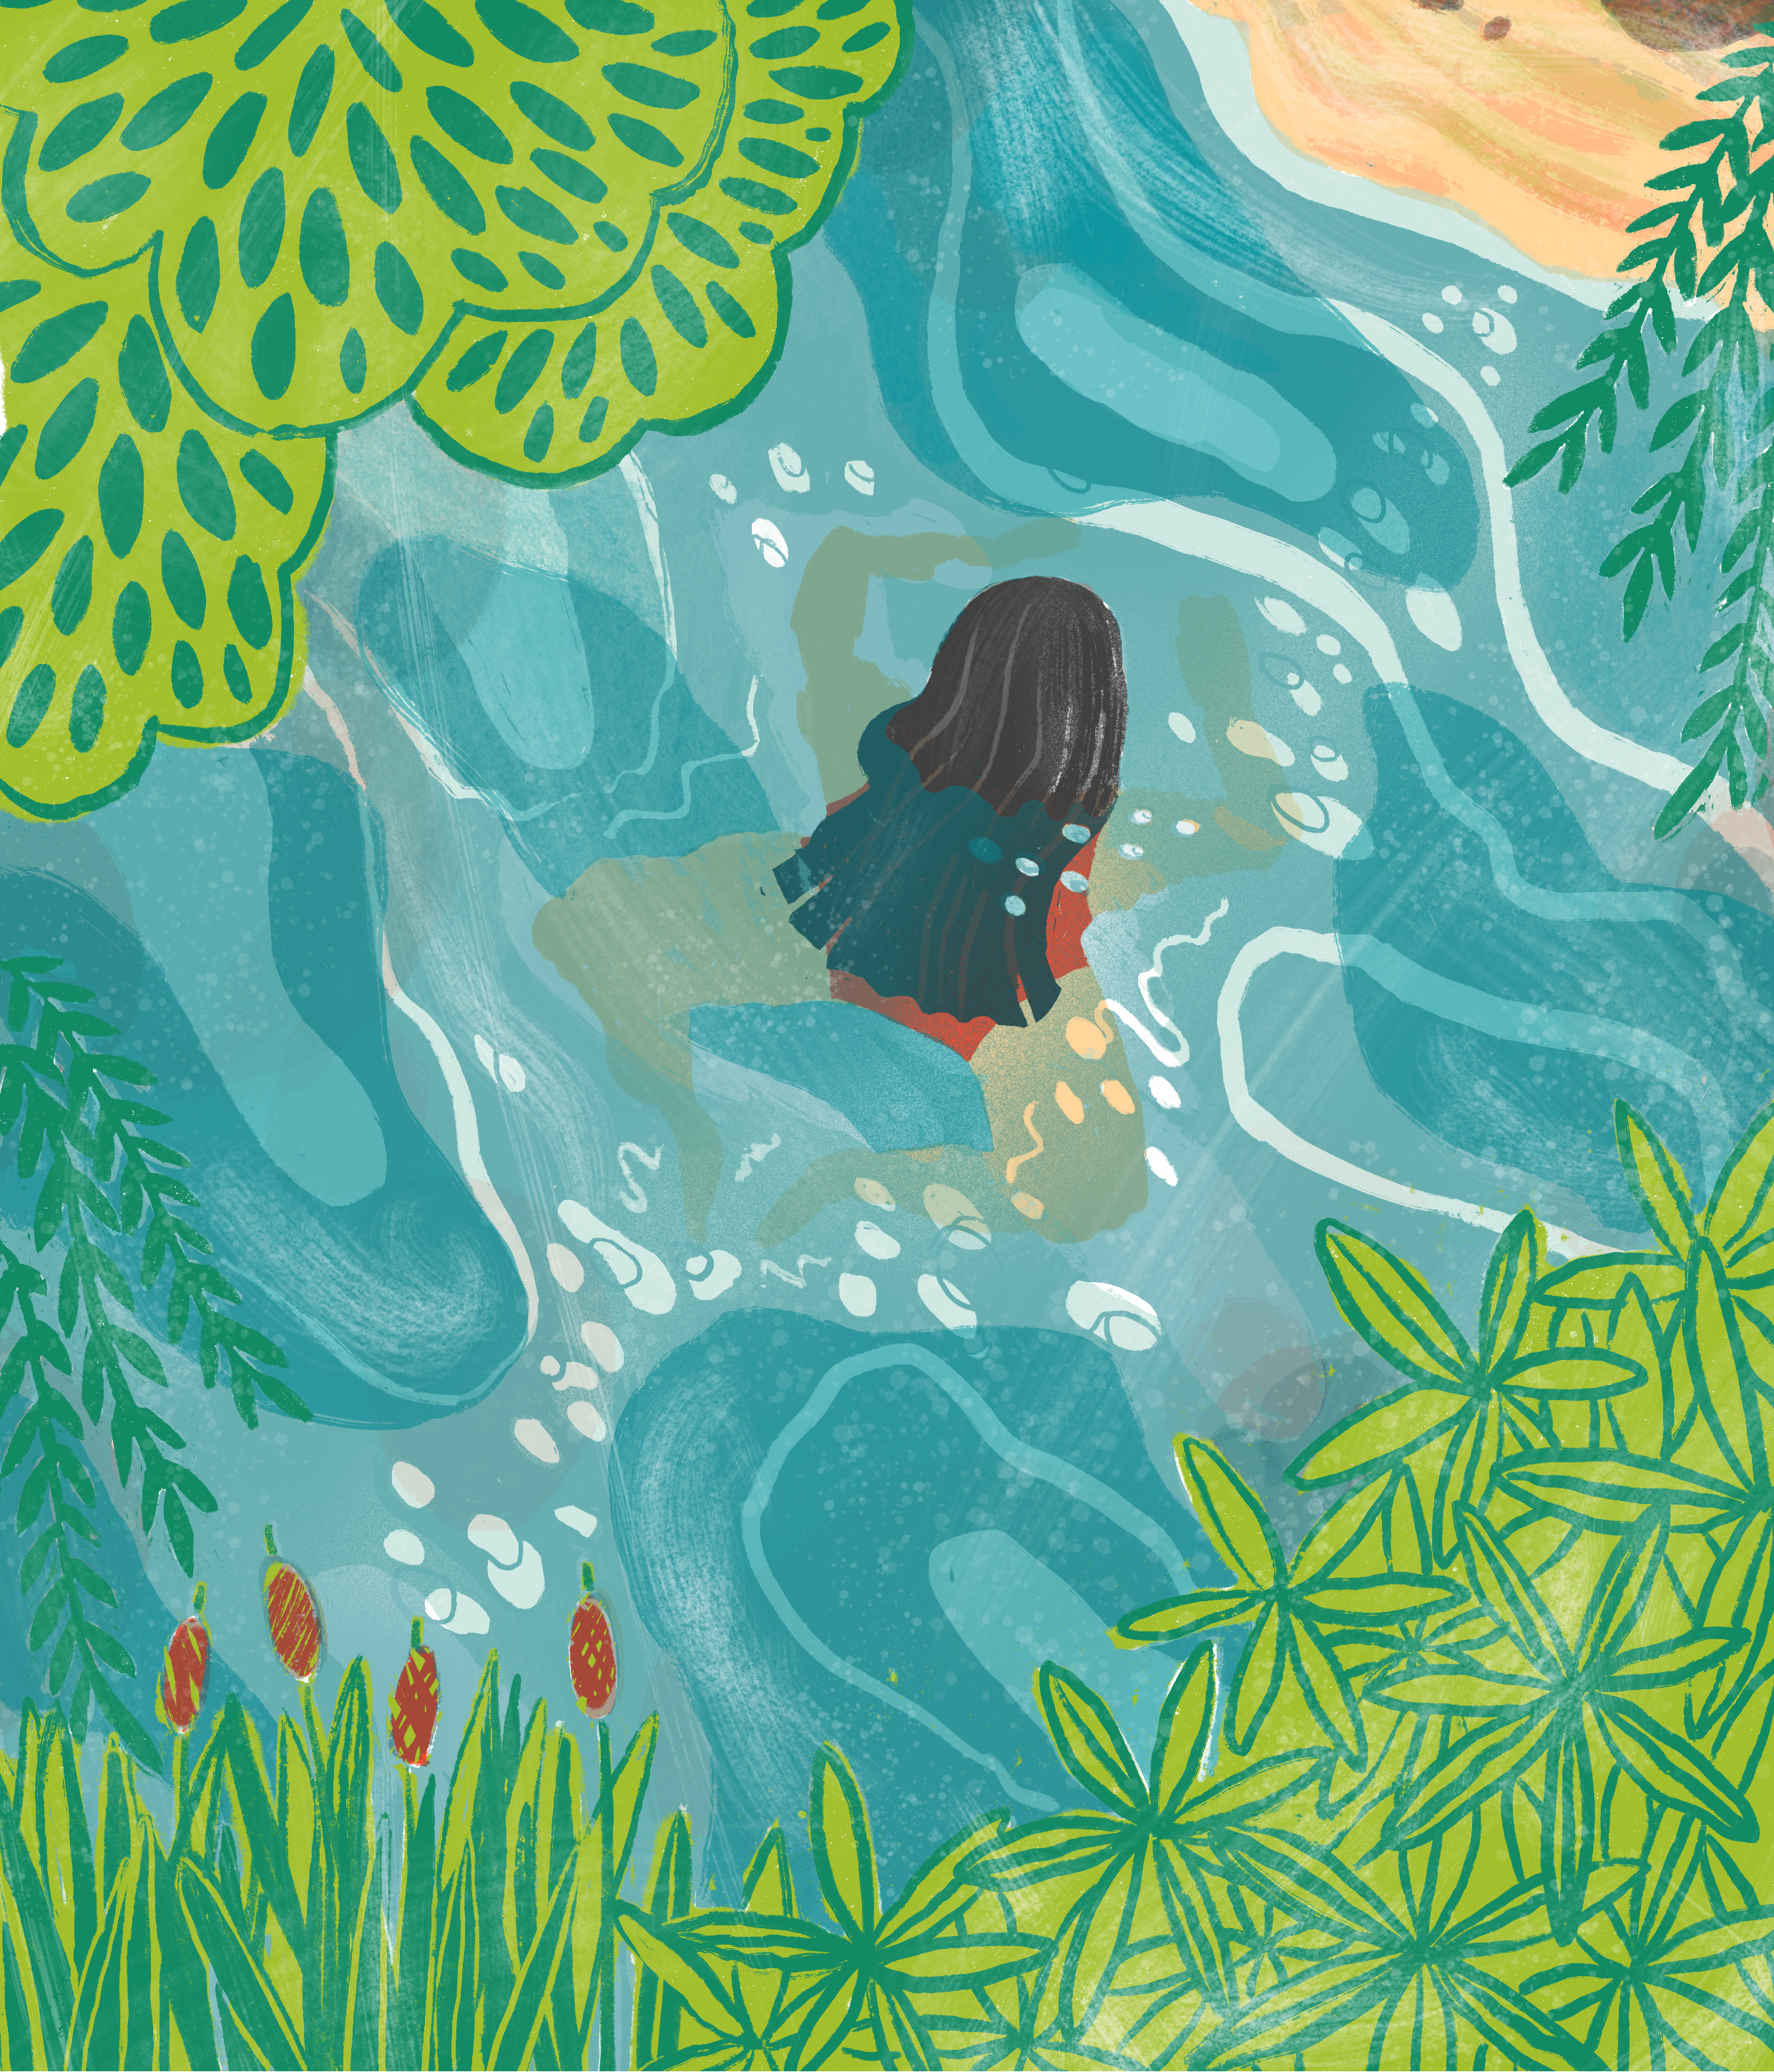 An illustrated image of a white woman with dark hair seen from above swimming a lake surrounded by leaves and reeds.